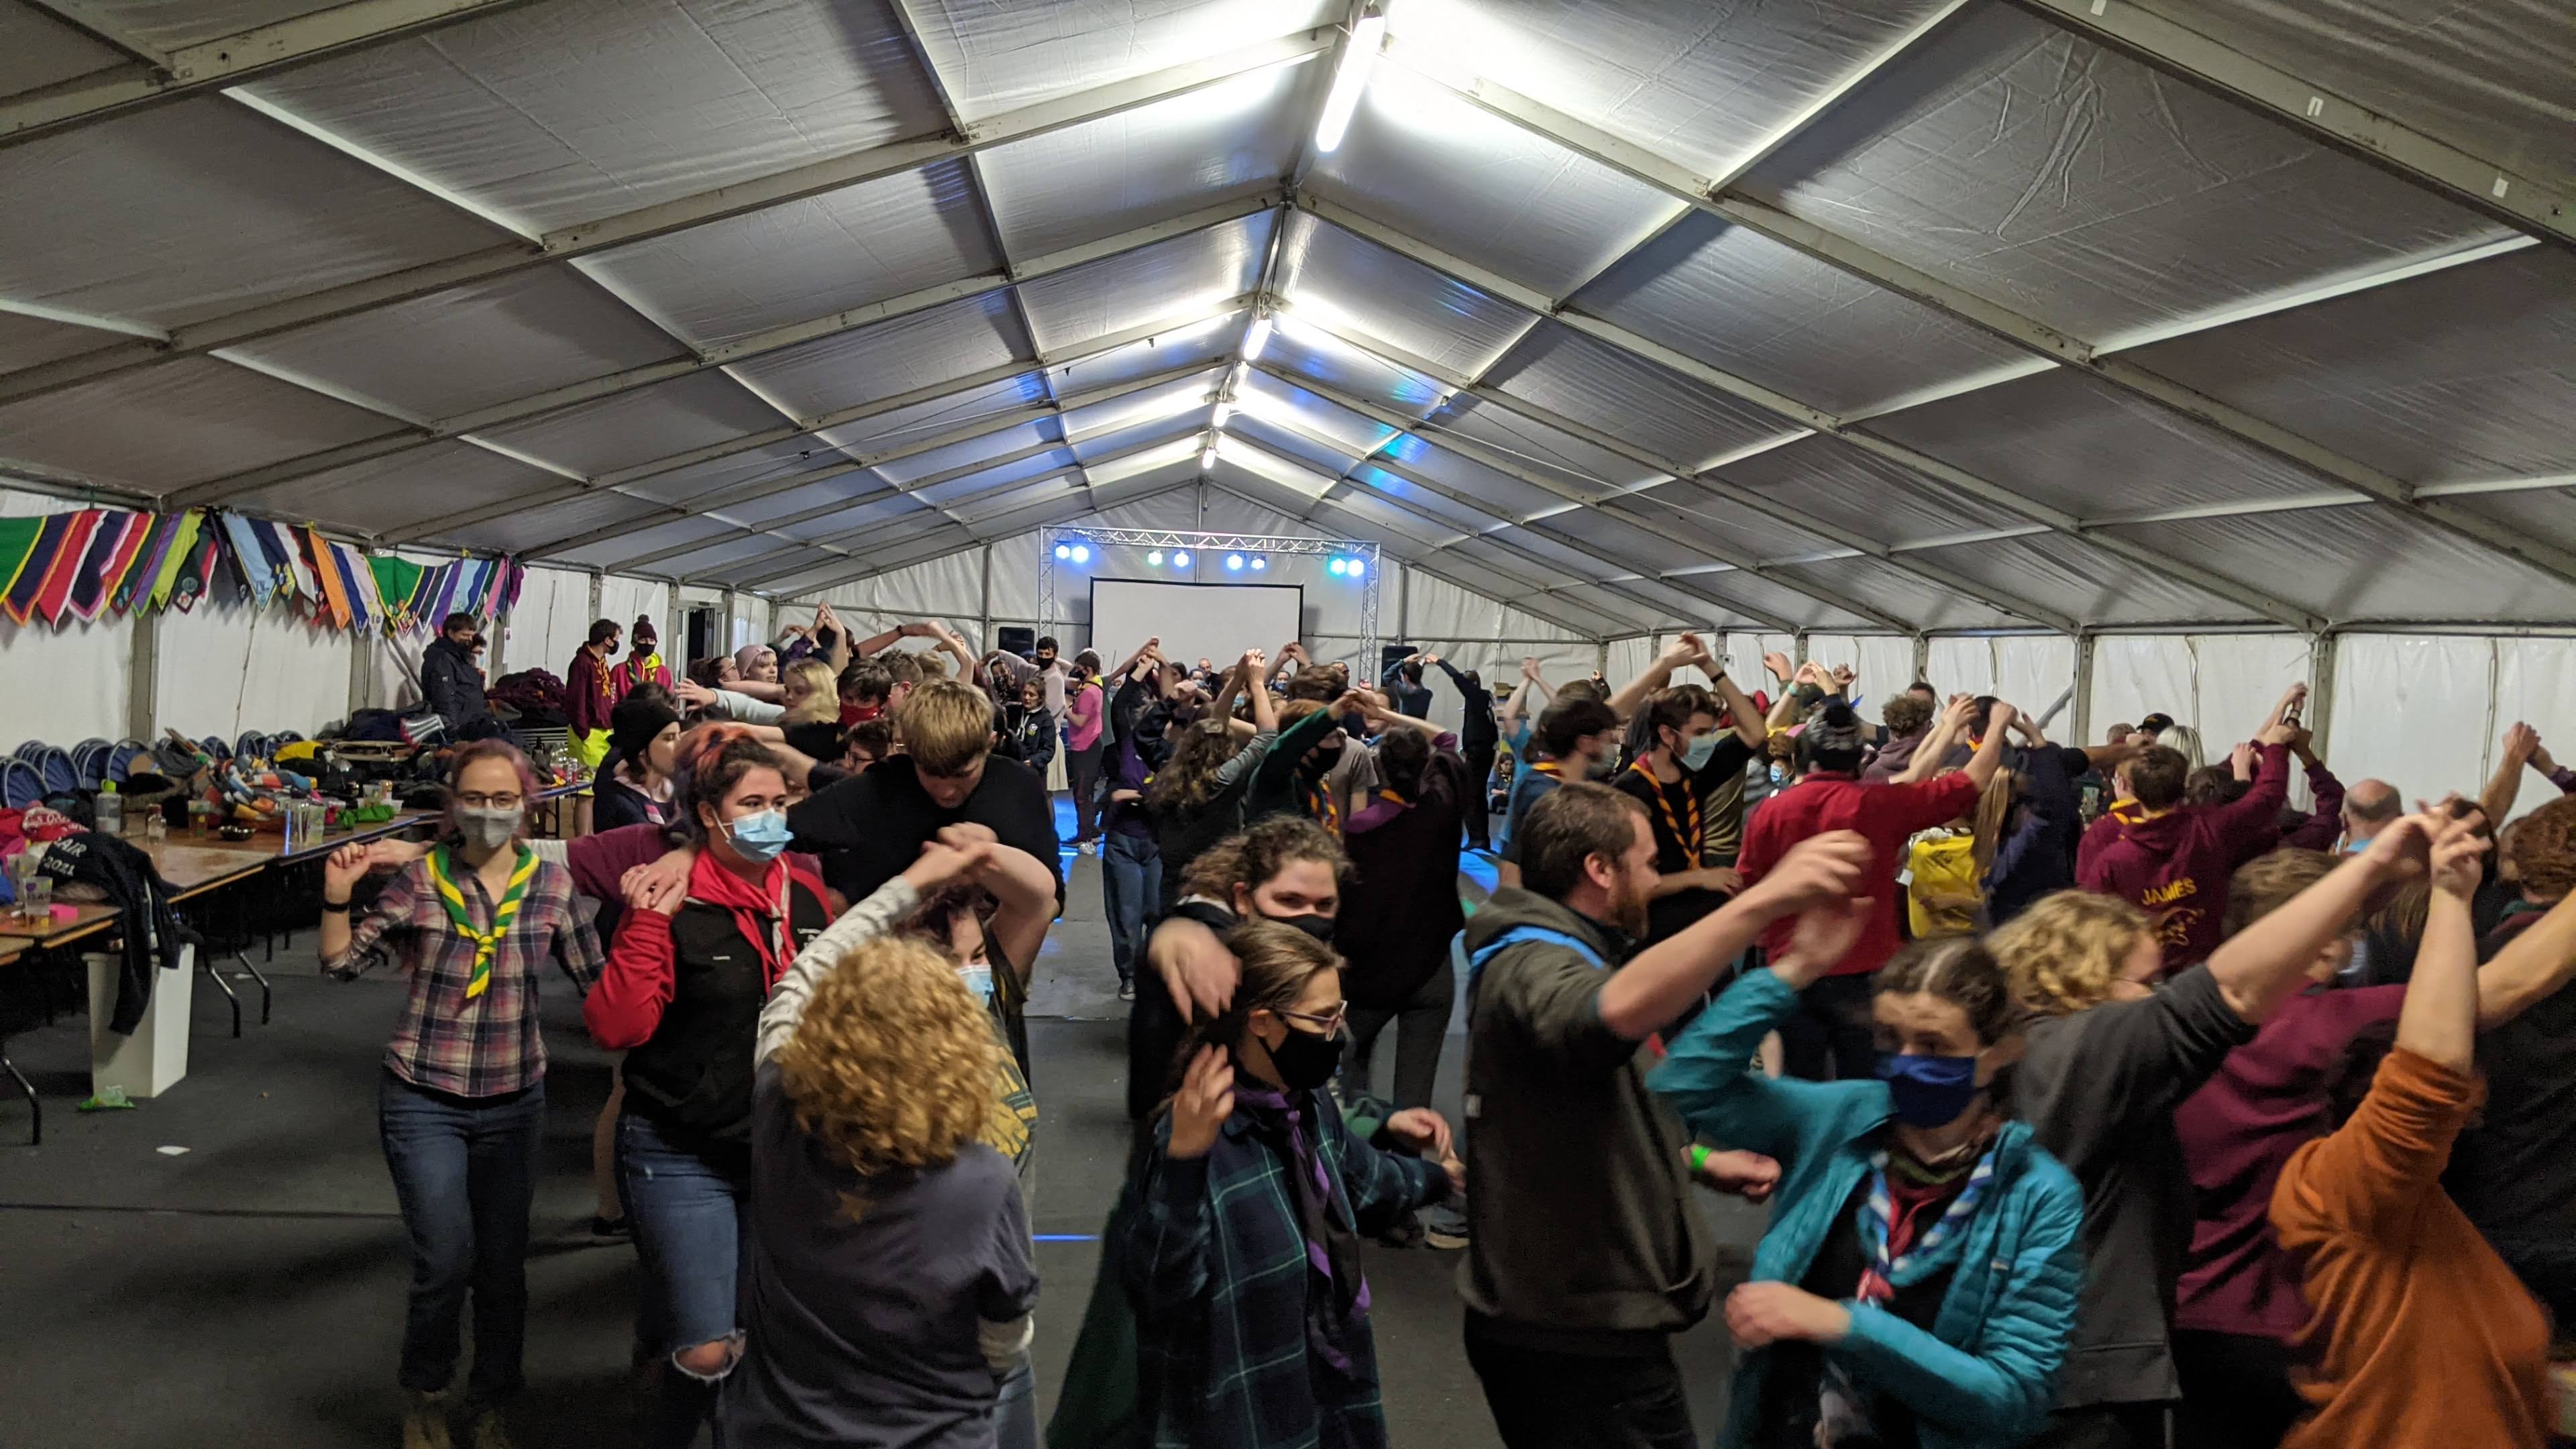 Wide shot of the marquee with people dancing during the ceilidh